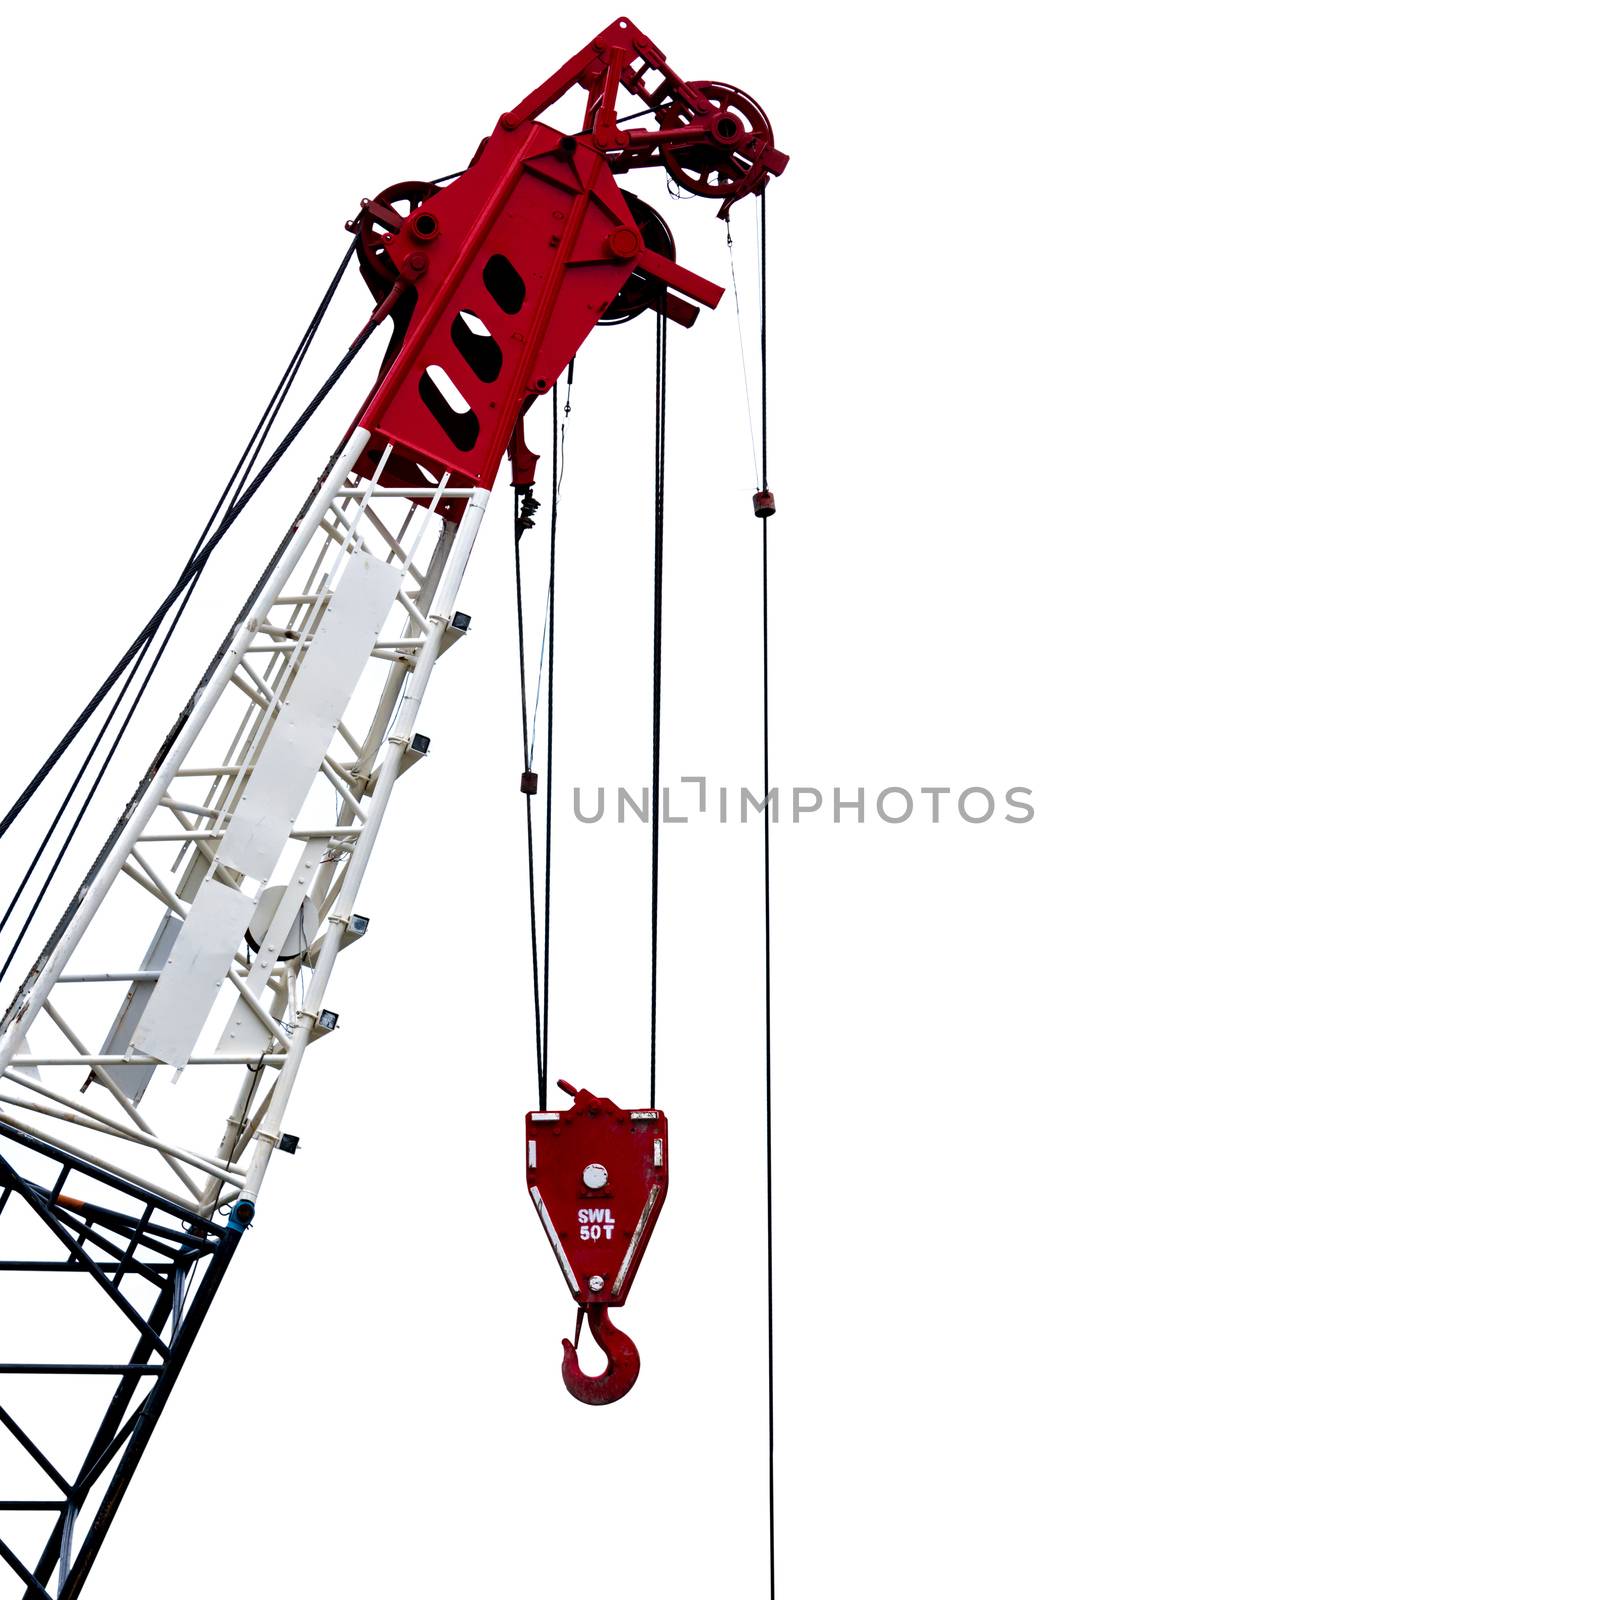 Construction crane for heavy lifting isolated on white background. Construction industry. Crane for lift with 50T safe working load. Crane for rent. Crane dealership for construction business.